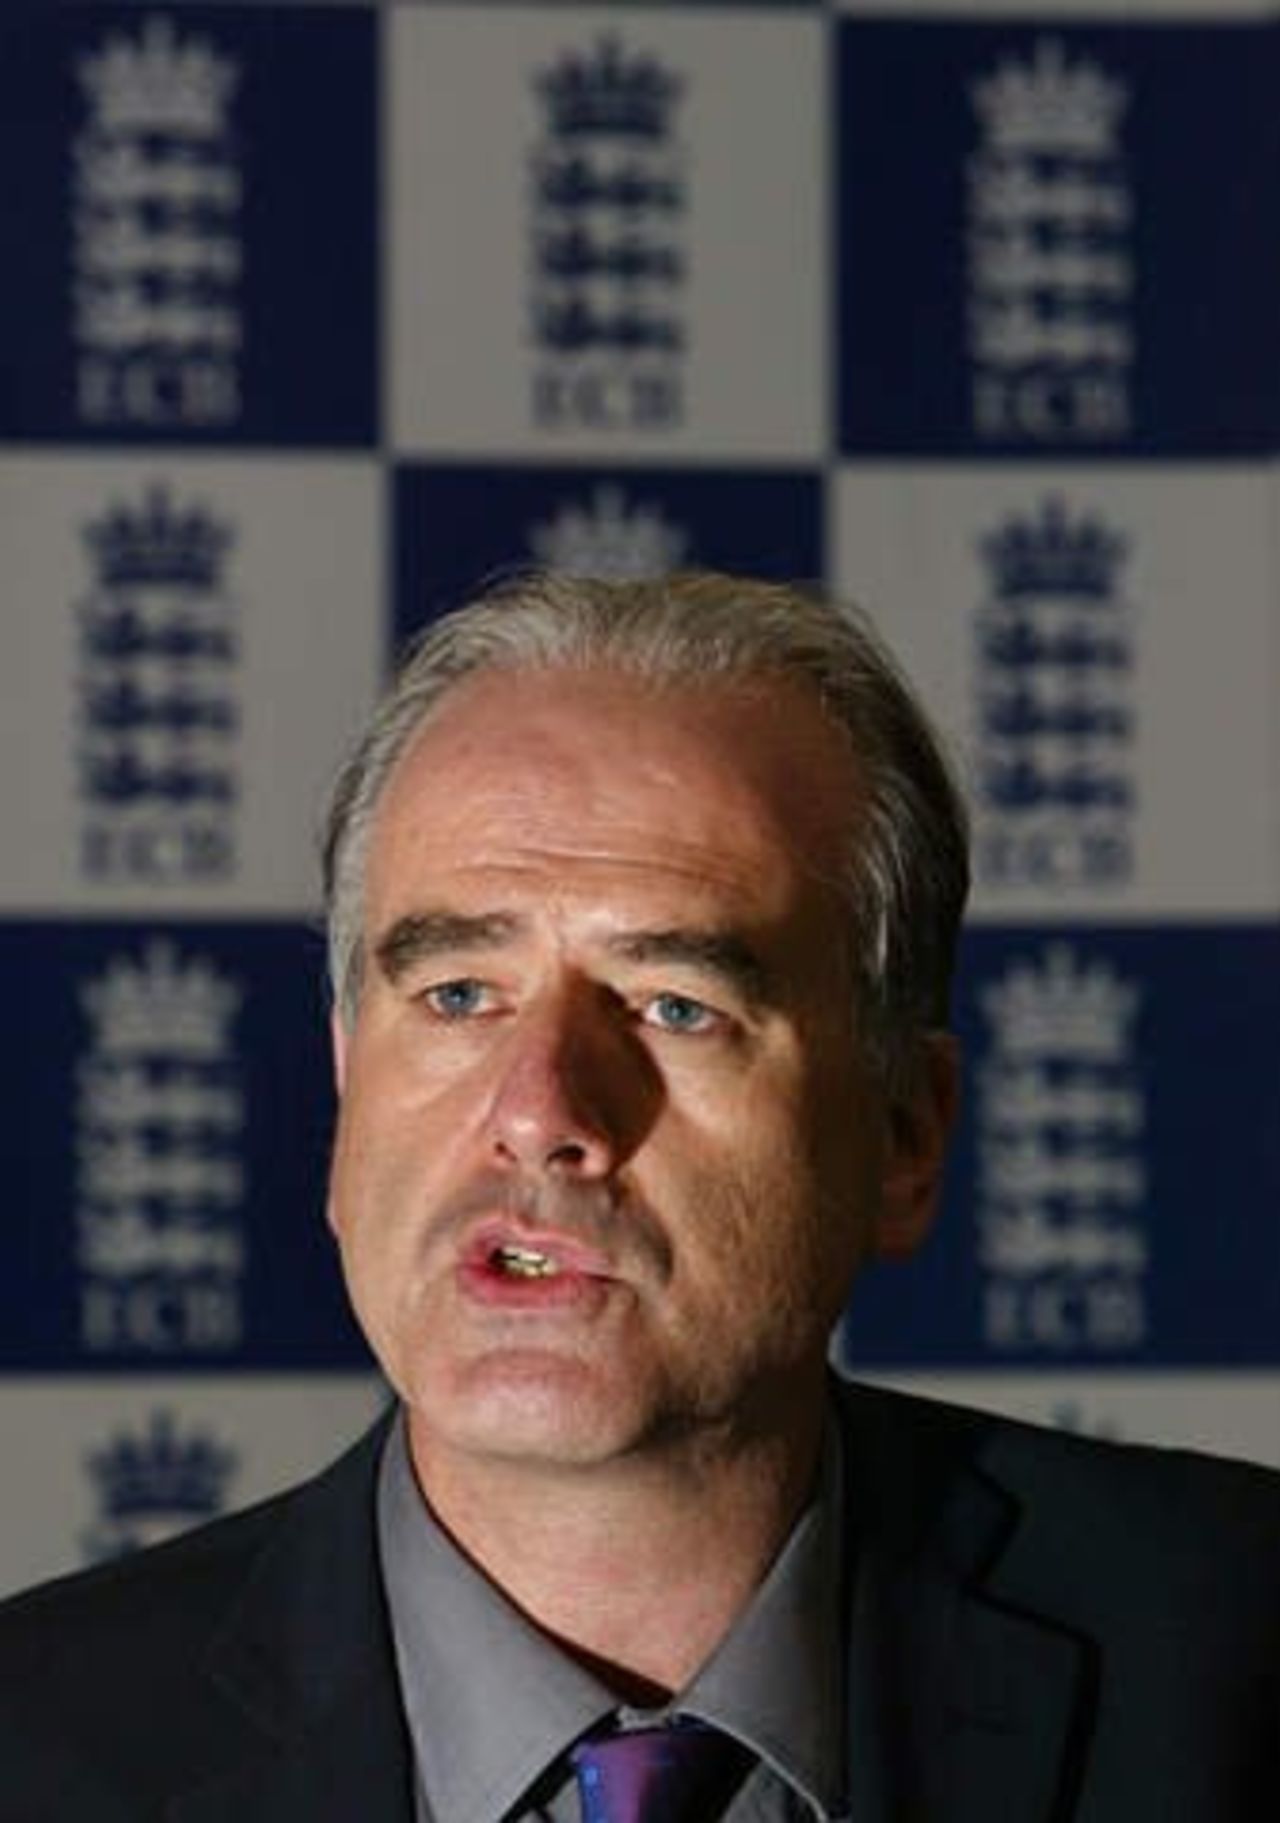 ECB Chief Executive Tim Lamb speaking at a press conference in London